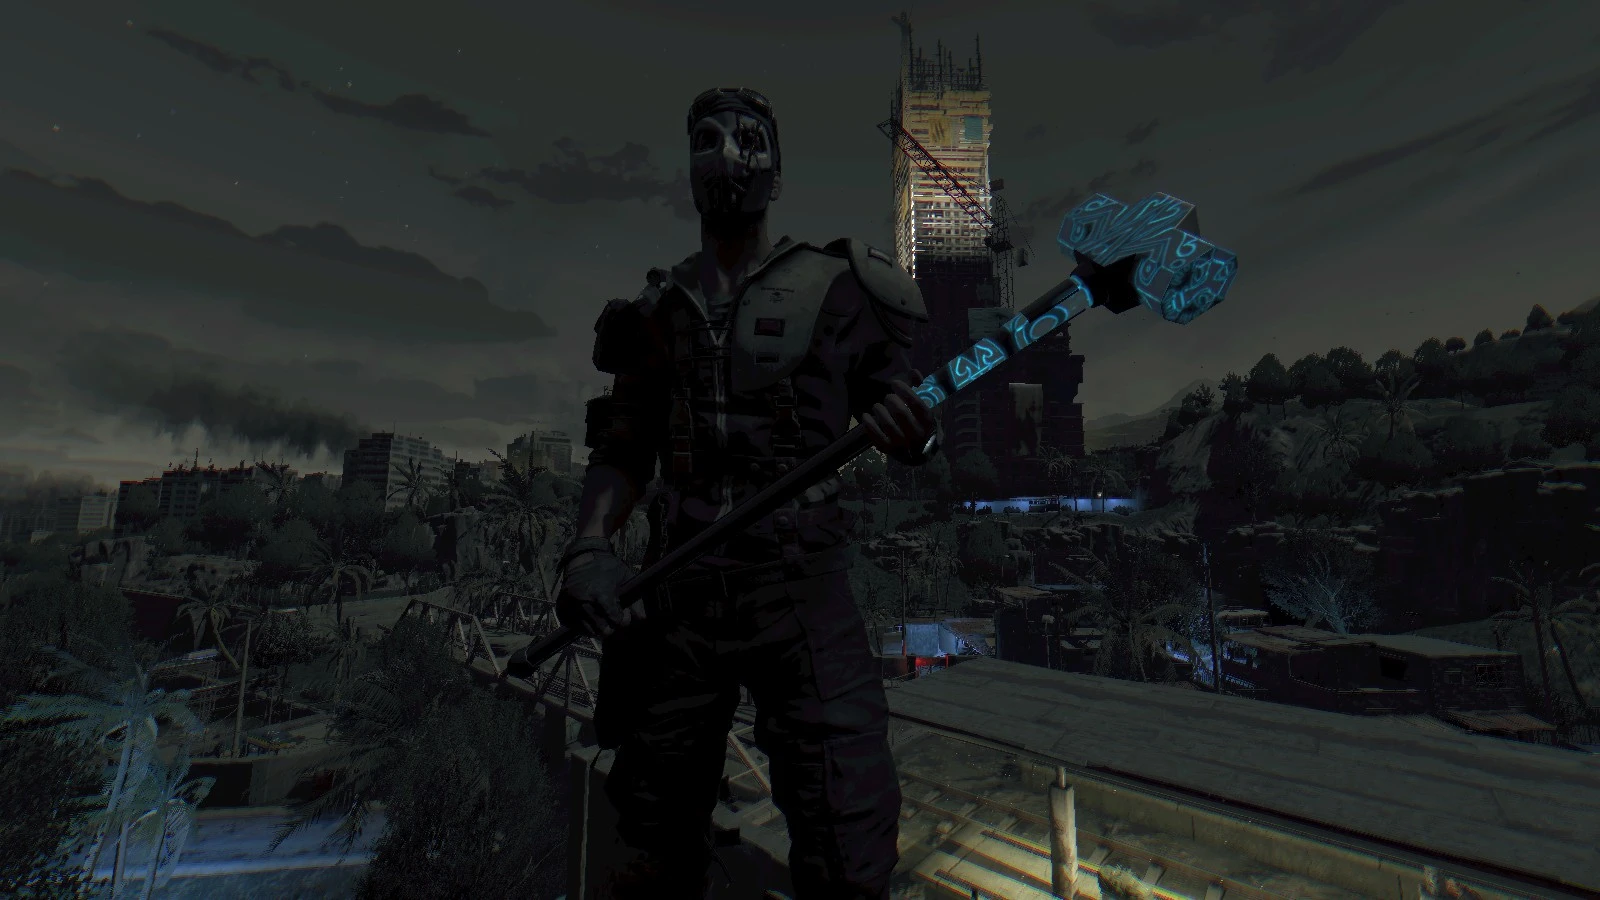 dying light weapon durability mod